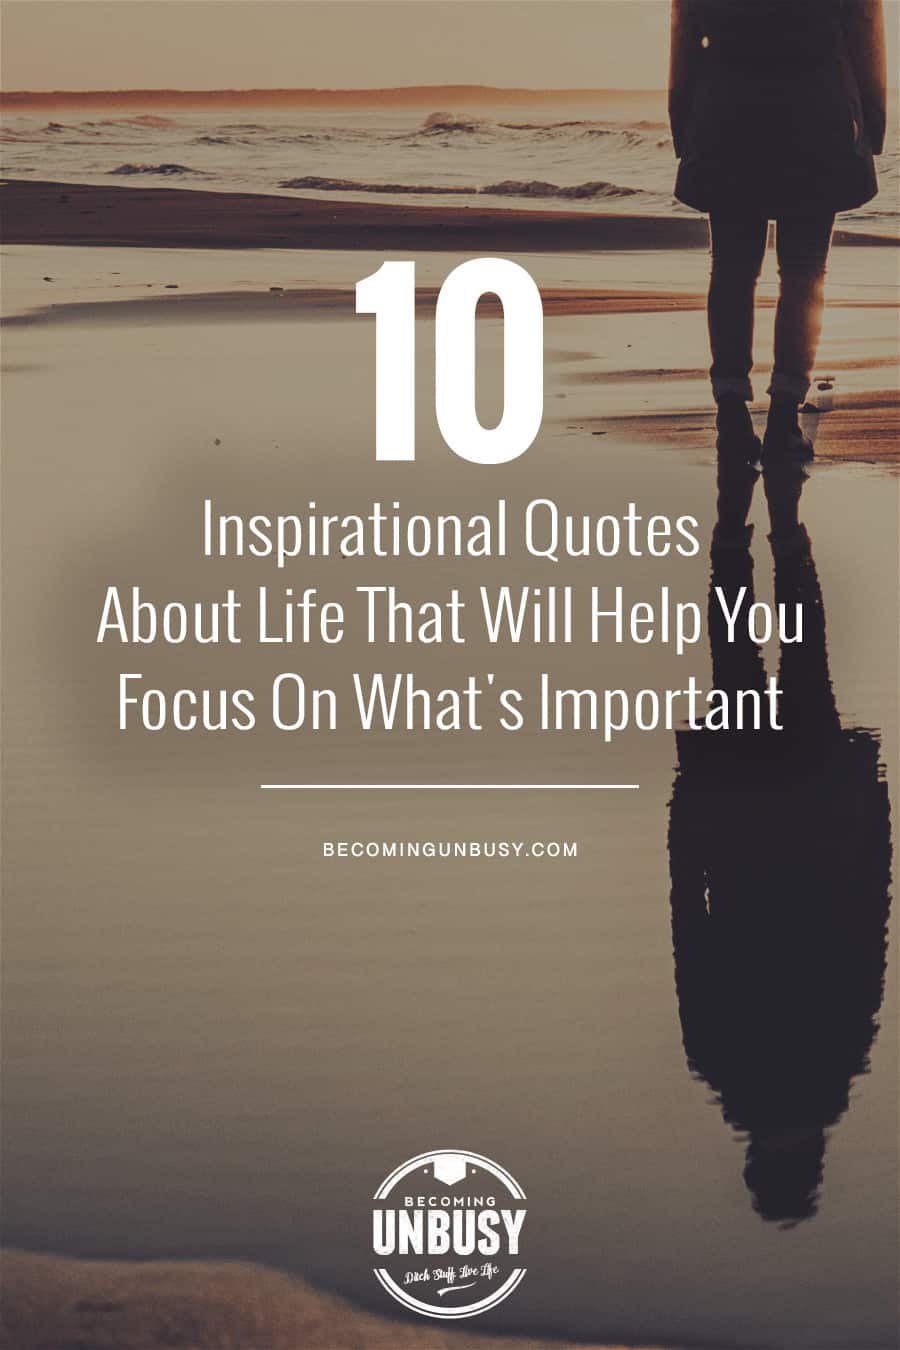 10 inspirational quotes about life that will help you focus on what's important #quotes #lifequotes #inspirationalquotes *Loving this collection of life quotes!